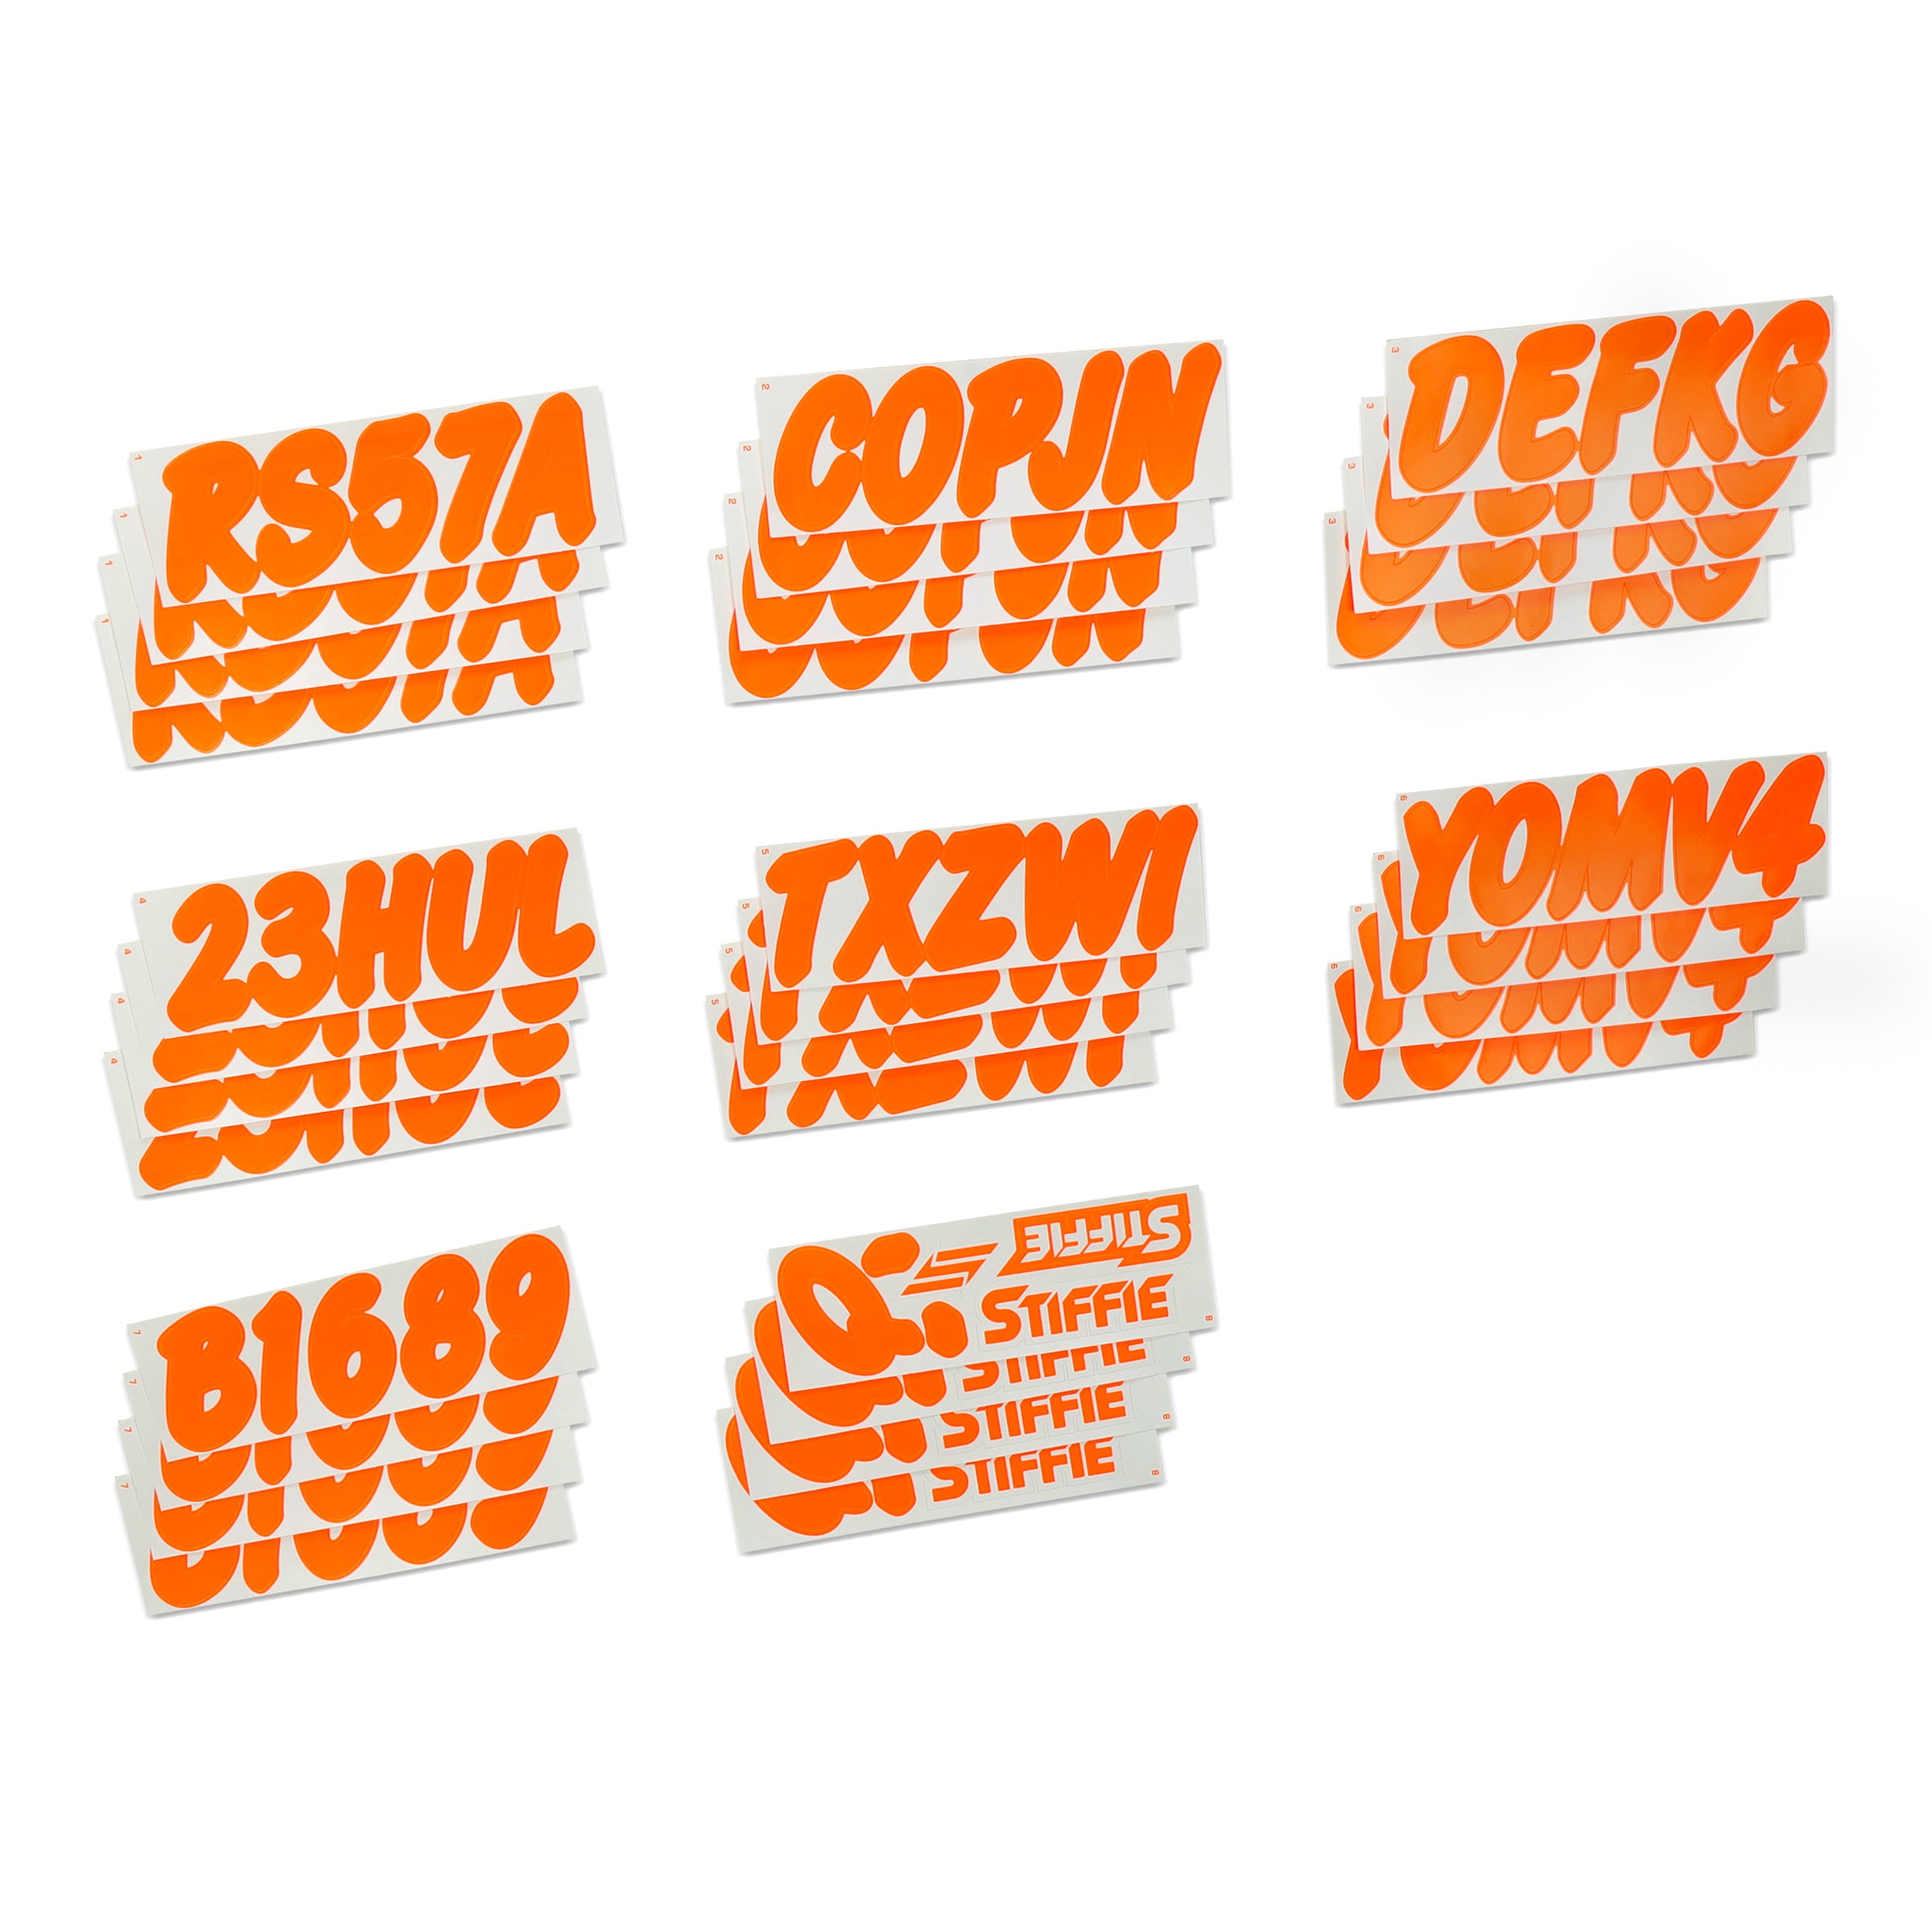 STIFFIE Whip-One Electric Orange 3" Alpha-Numeric Registration Identification Numbers Stickers Decals for Boats & Personal Watercraft